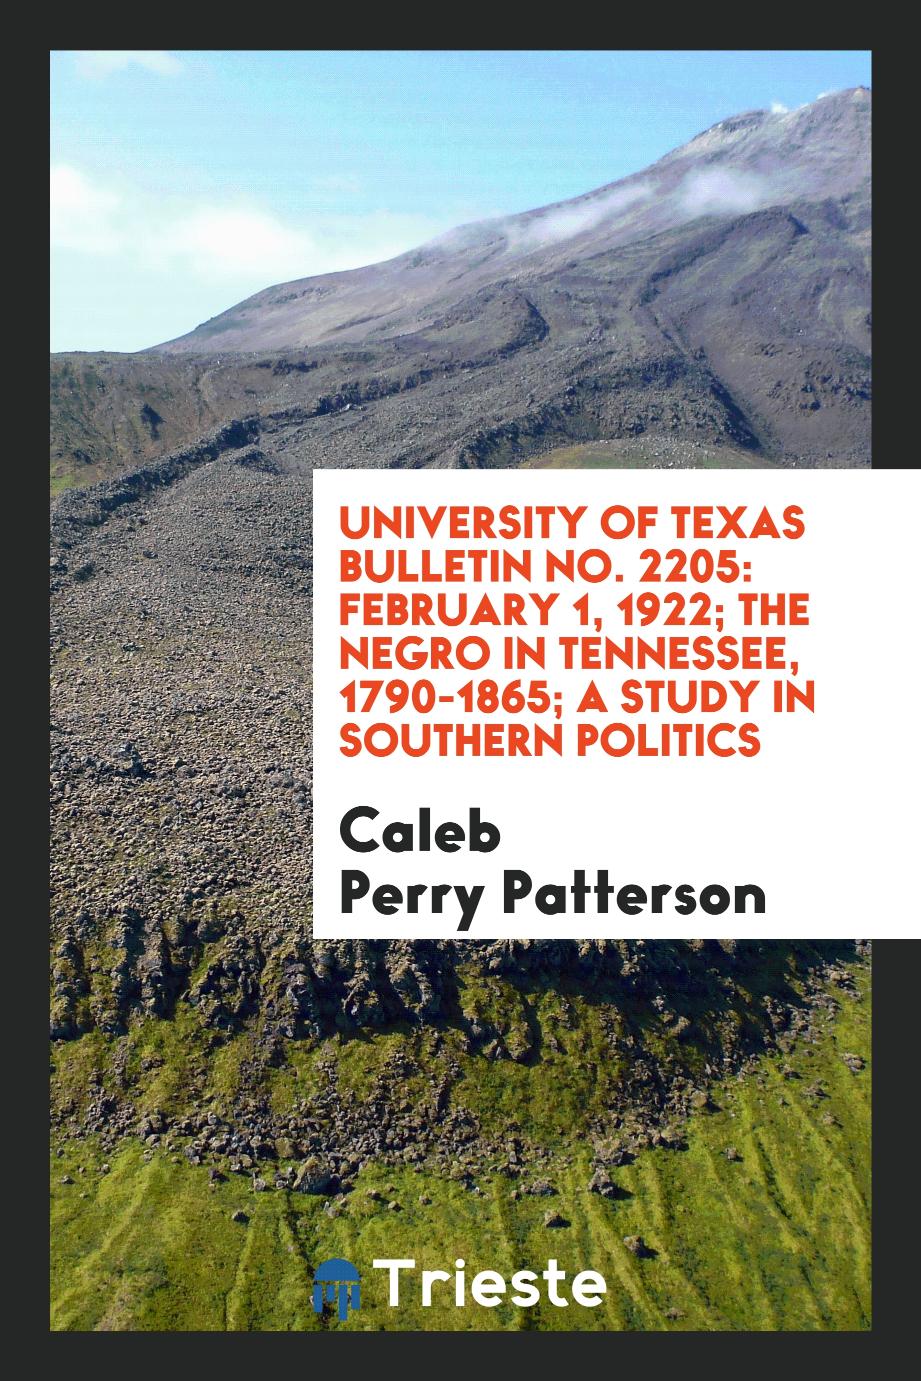 University of Texas Bulletin No. 2205: February 1, 1922; The Negro in Tennessee, 1790-1865; A study in southern politics